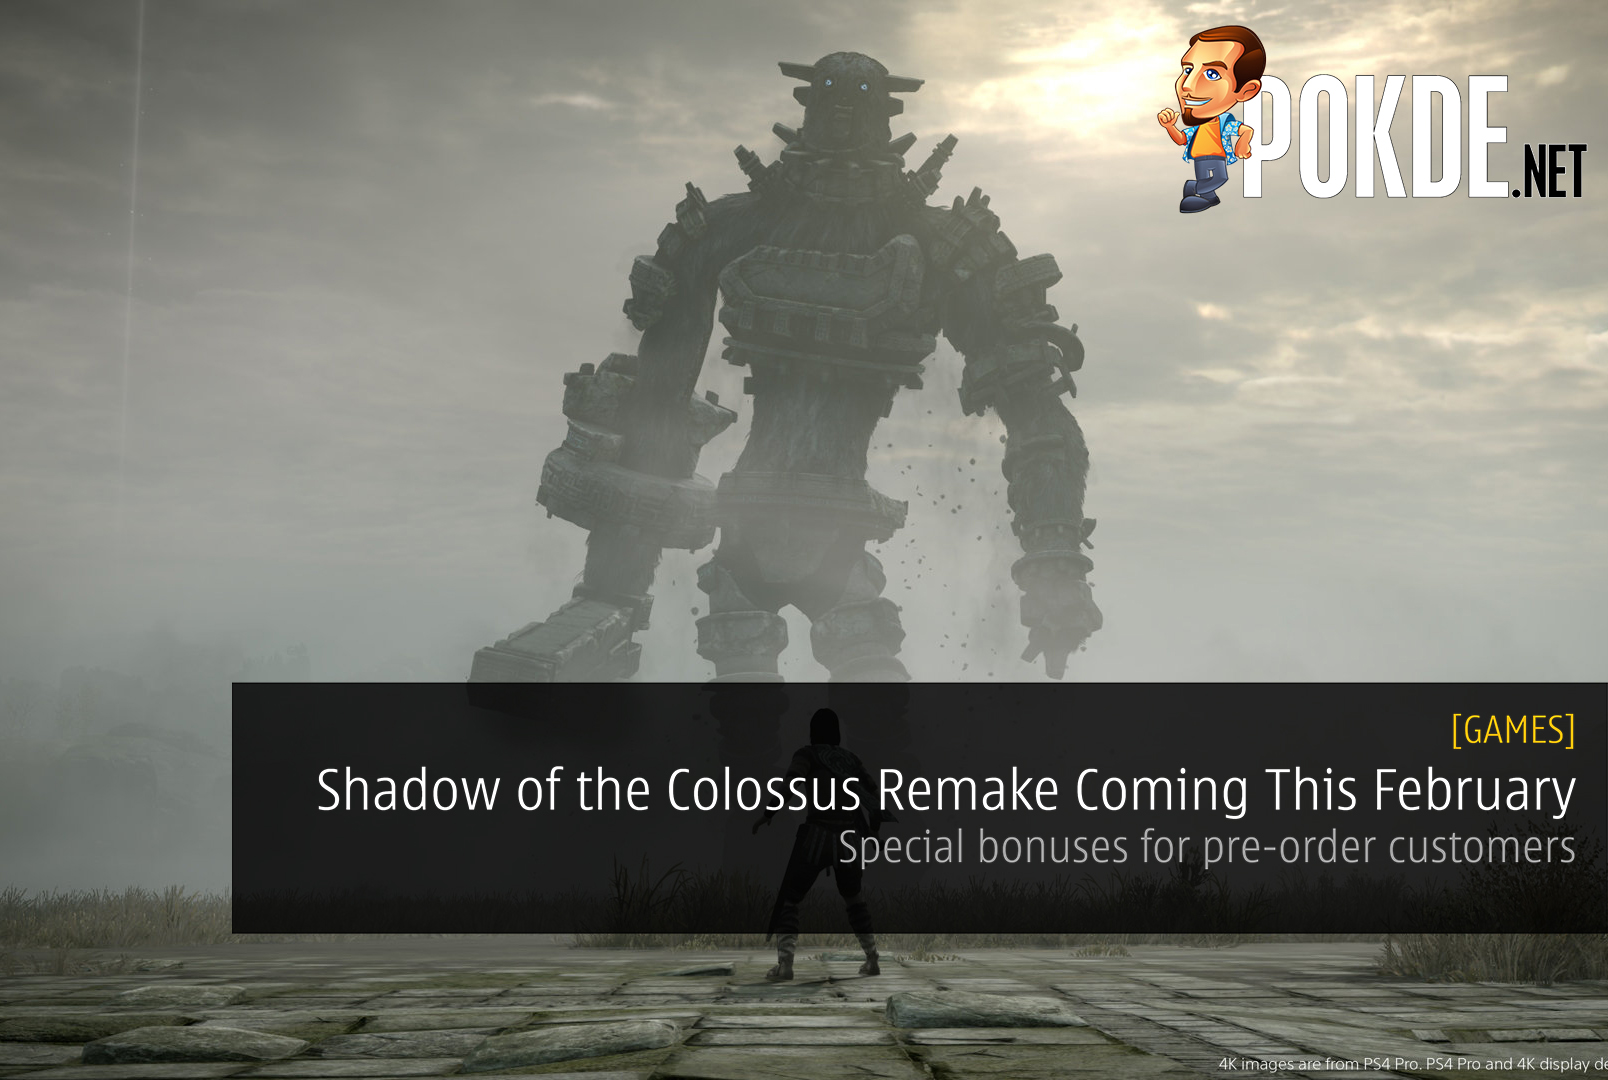 Shadow of the Colossus Remake Coming To The PS4 This February - Special bonuses for pre-order customers 21